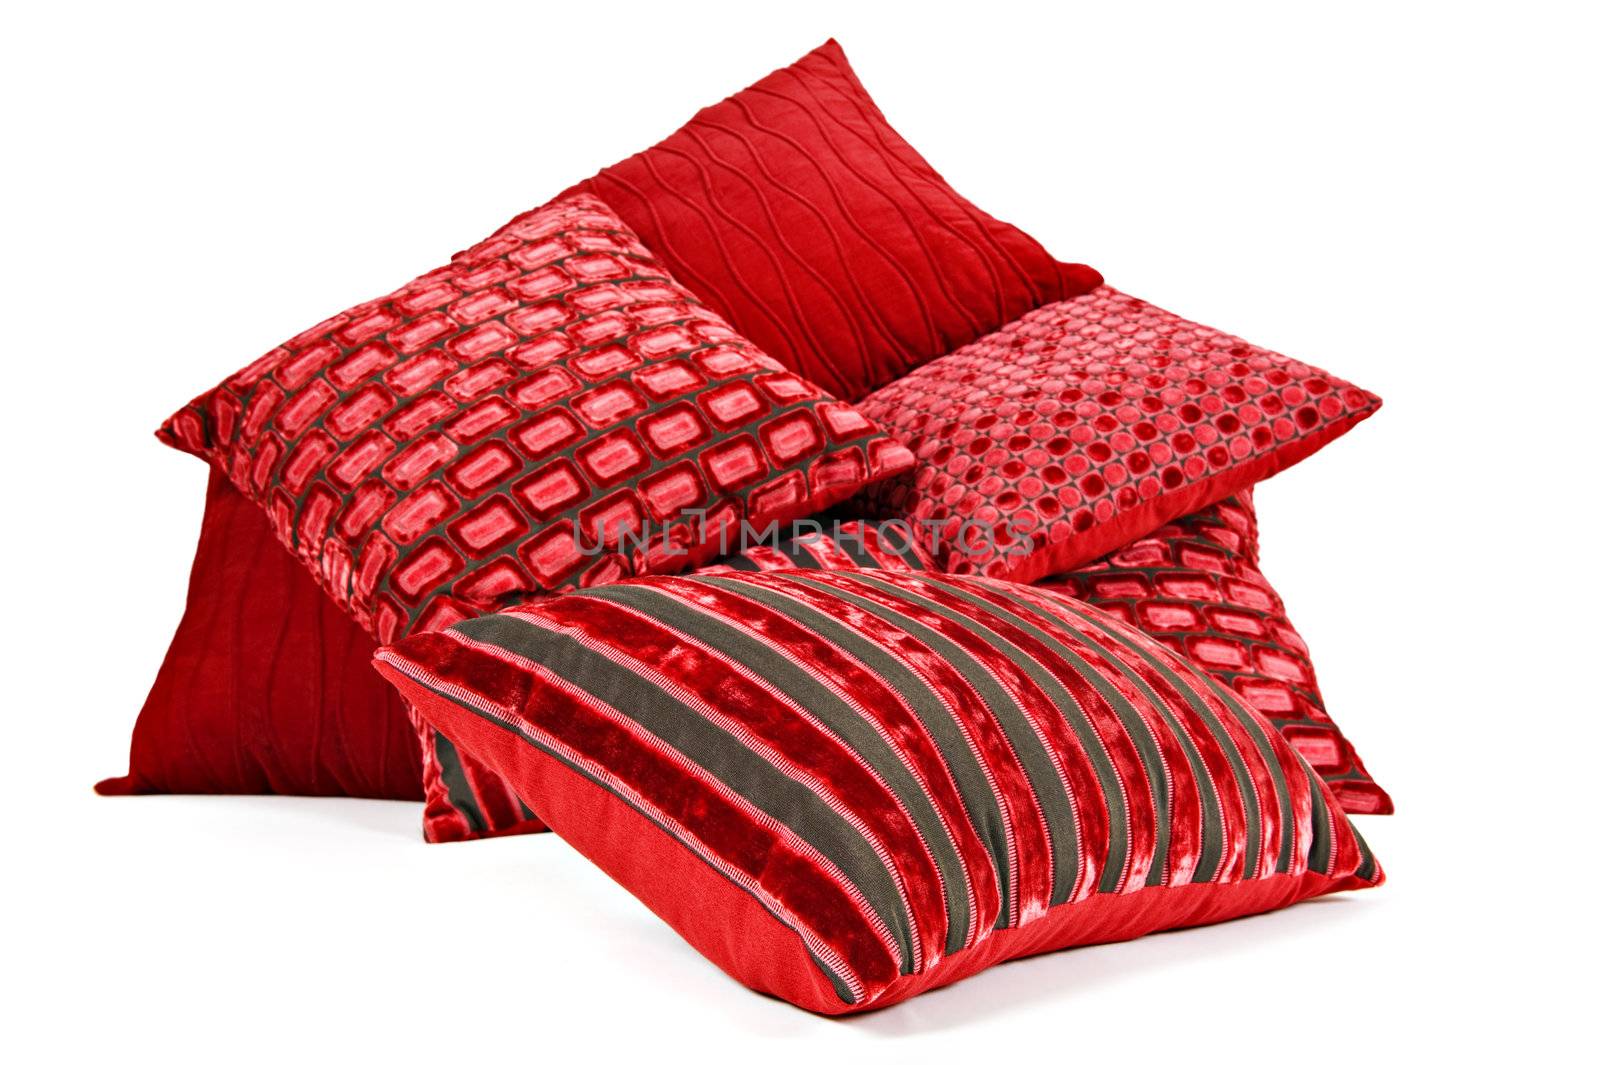 Red cushions stacked up on a white background with space for text